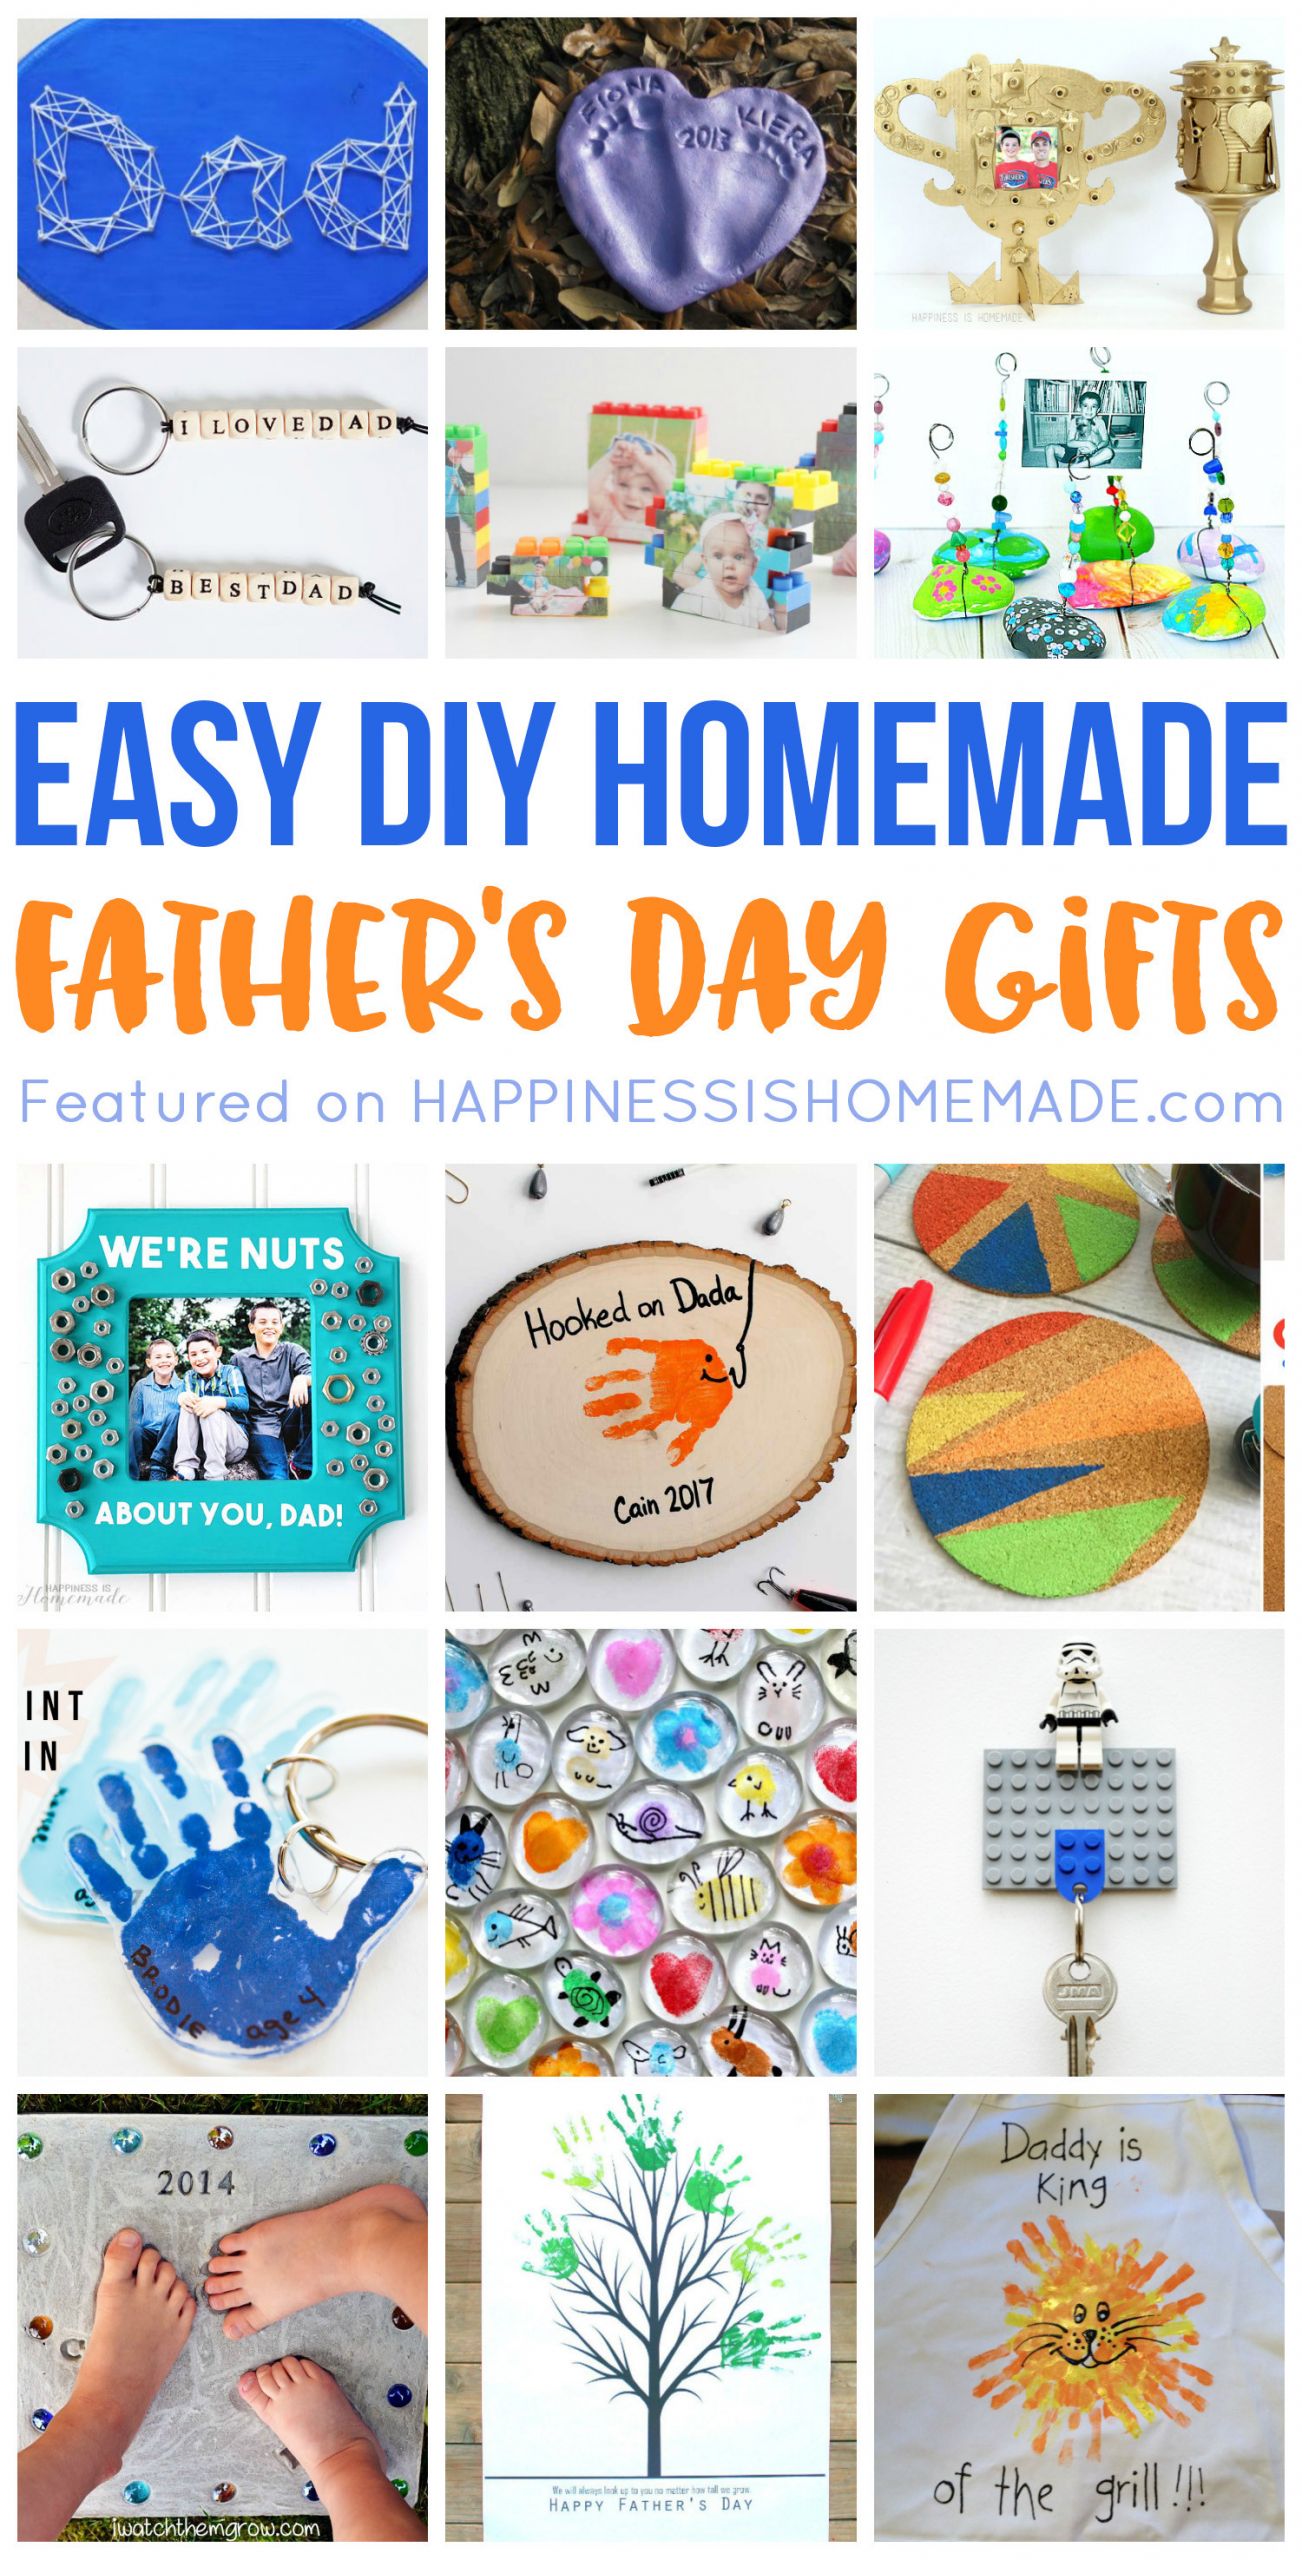 Fathers Day Gift Ideas For Kids To Make
 20 Homemade Father s Day Gifts That Kids Can Make